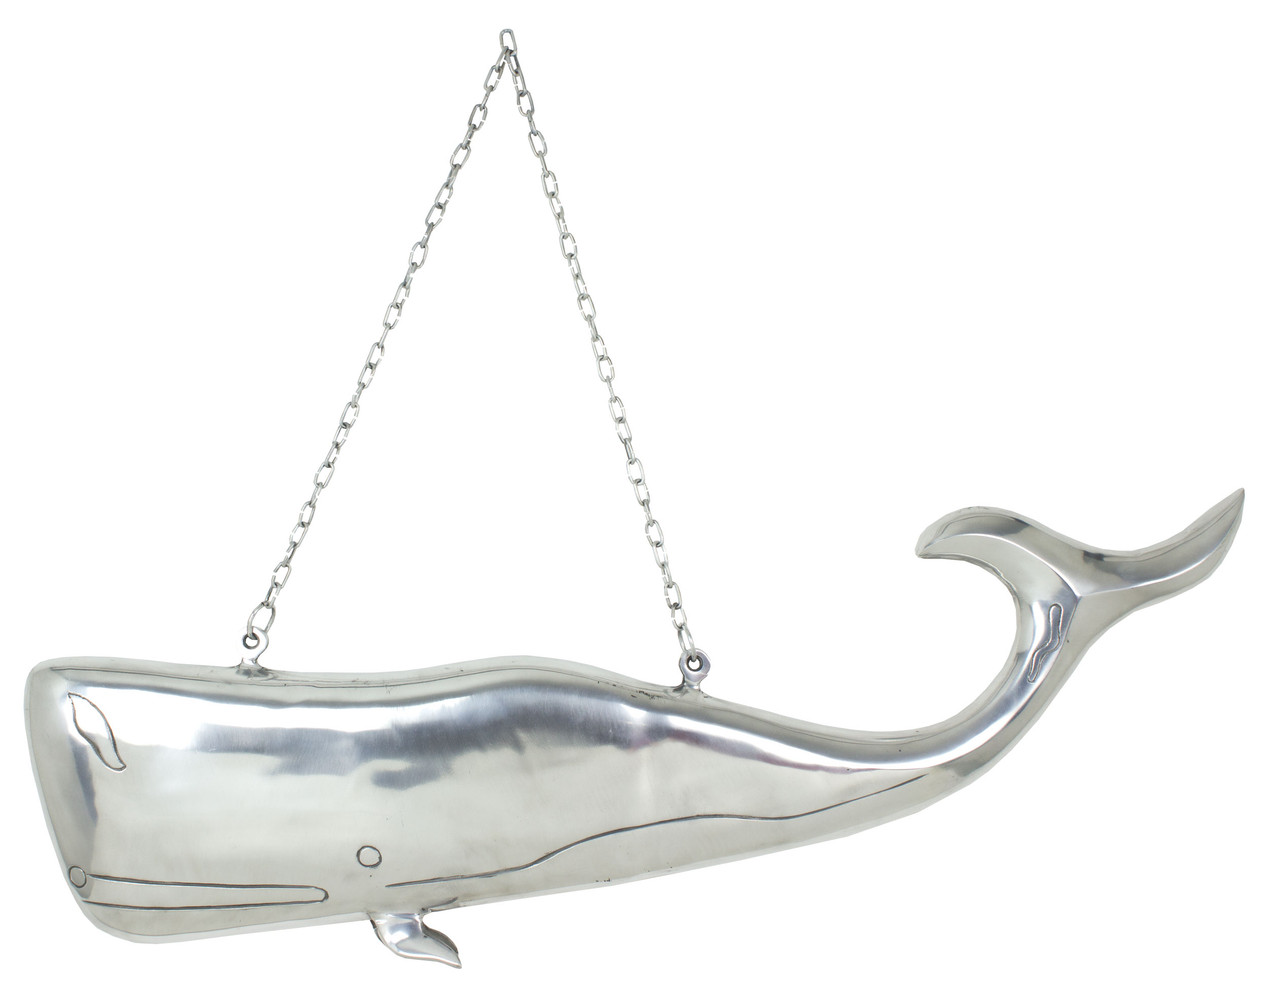 (MAL-179)
Extra Large Polished Aluminum Hanging Whale with Chain